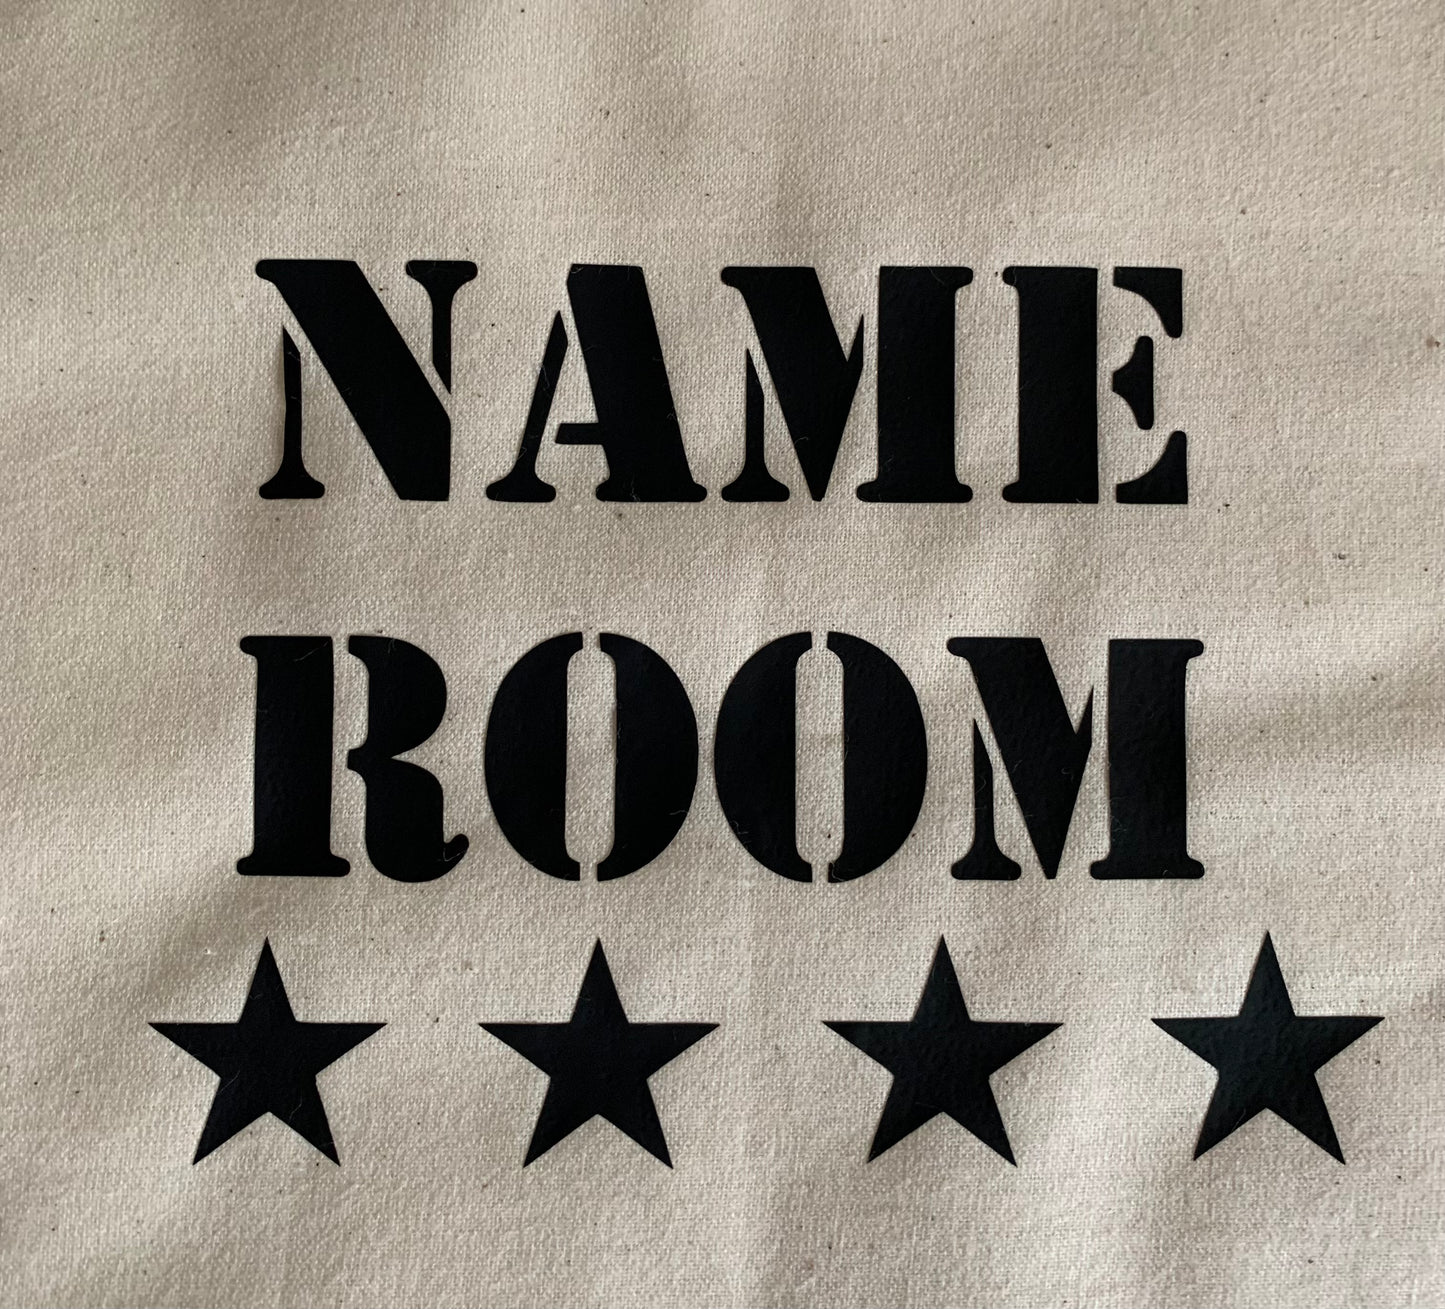 PERSONALISED CALICO WALL BANNER